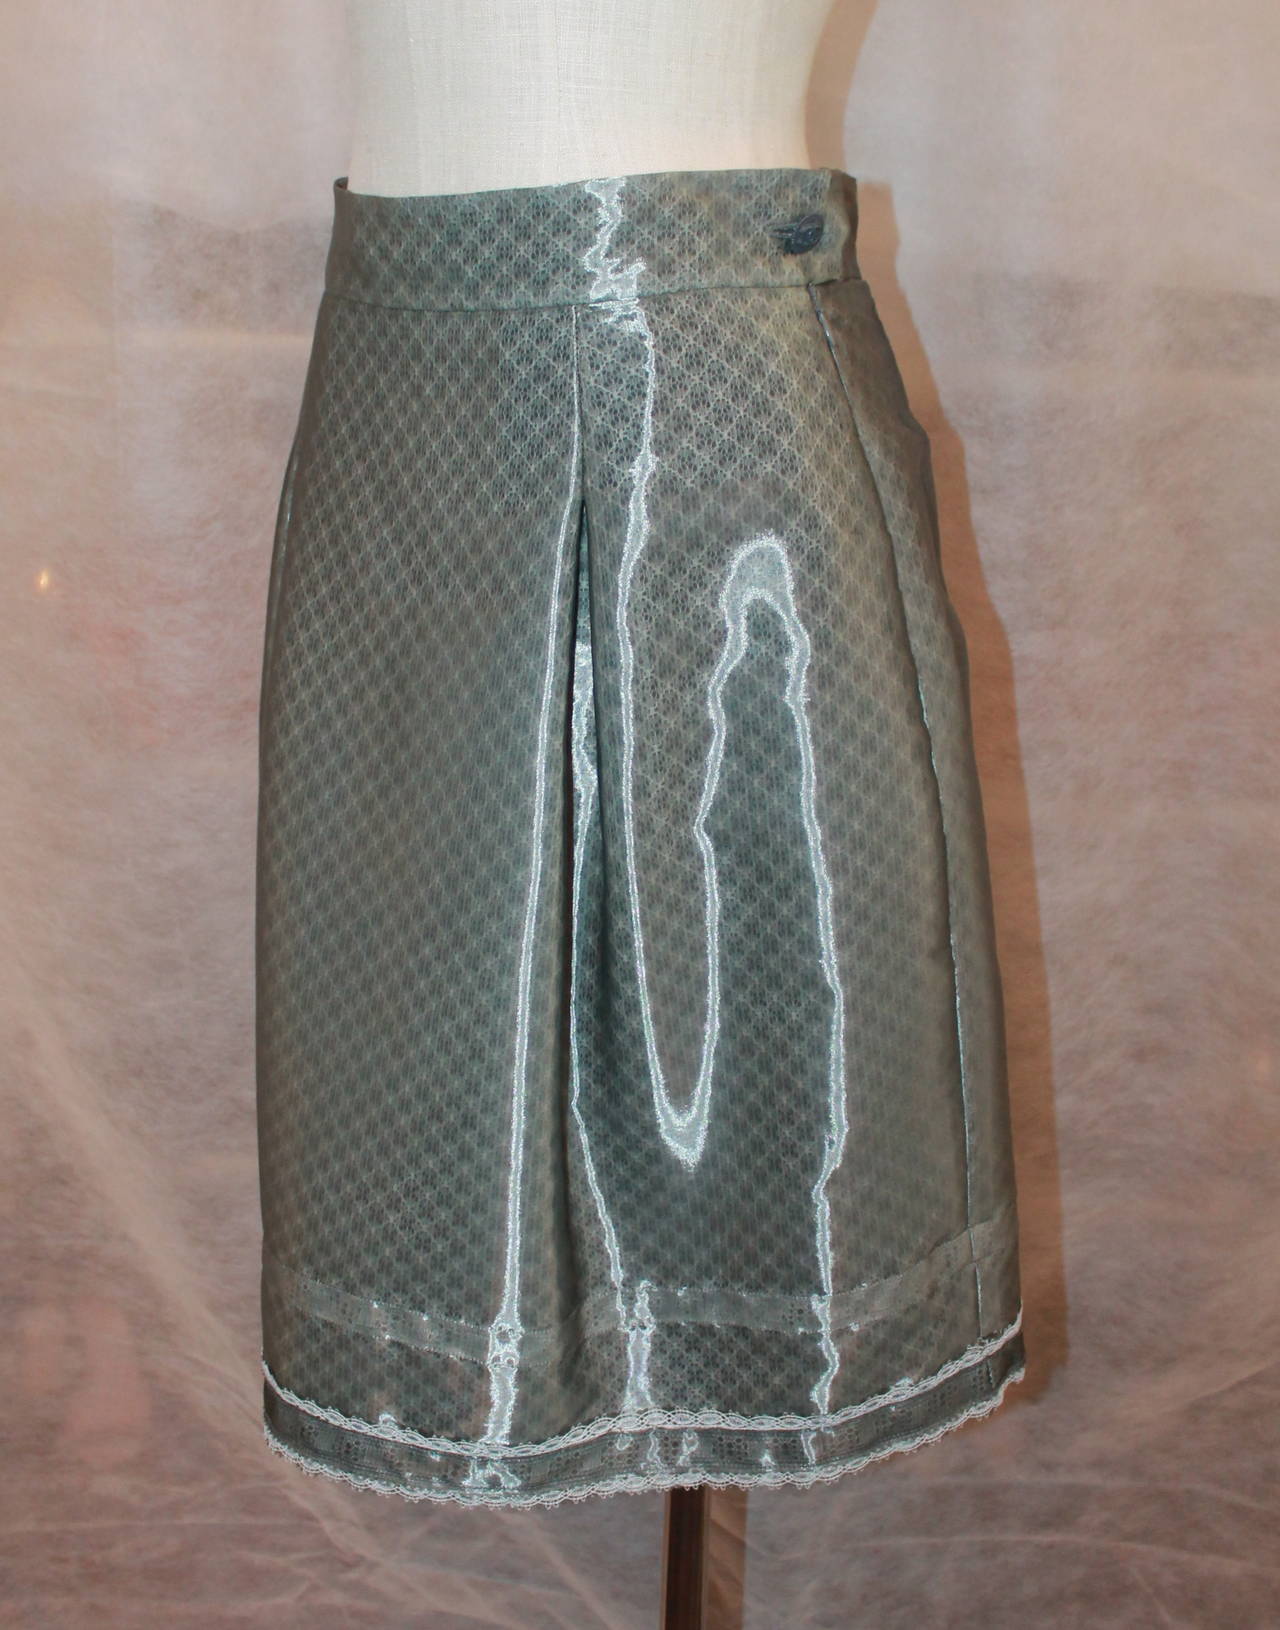 Chanel 2009 Sheer Gunmetal & Lace Layered Skirt - 42. This skirt is in excellent condition and has a waistband with box pleat. It also has side pockets and zipper. The bottom has a lace bordering (image 5). 

Measurements:
Waist-